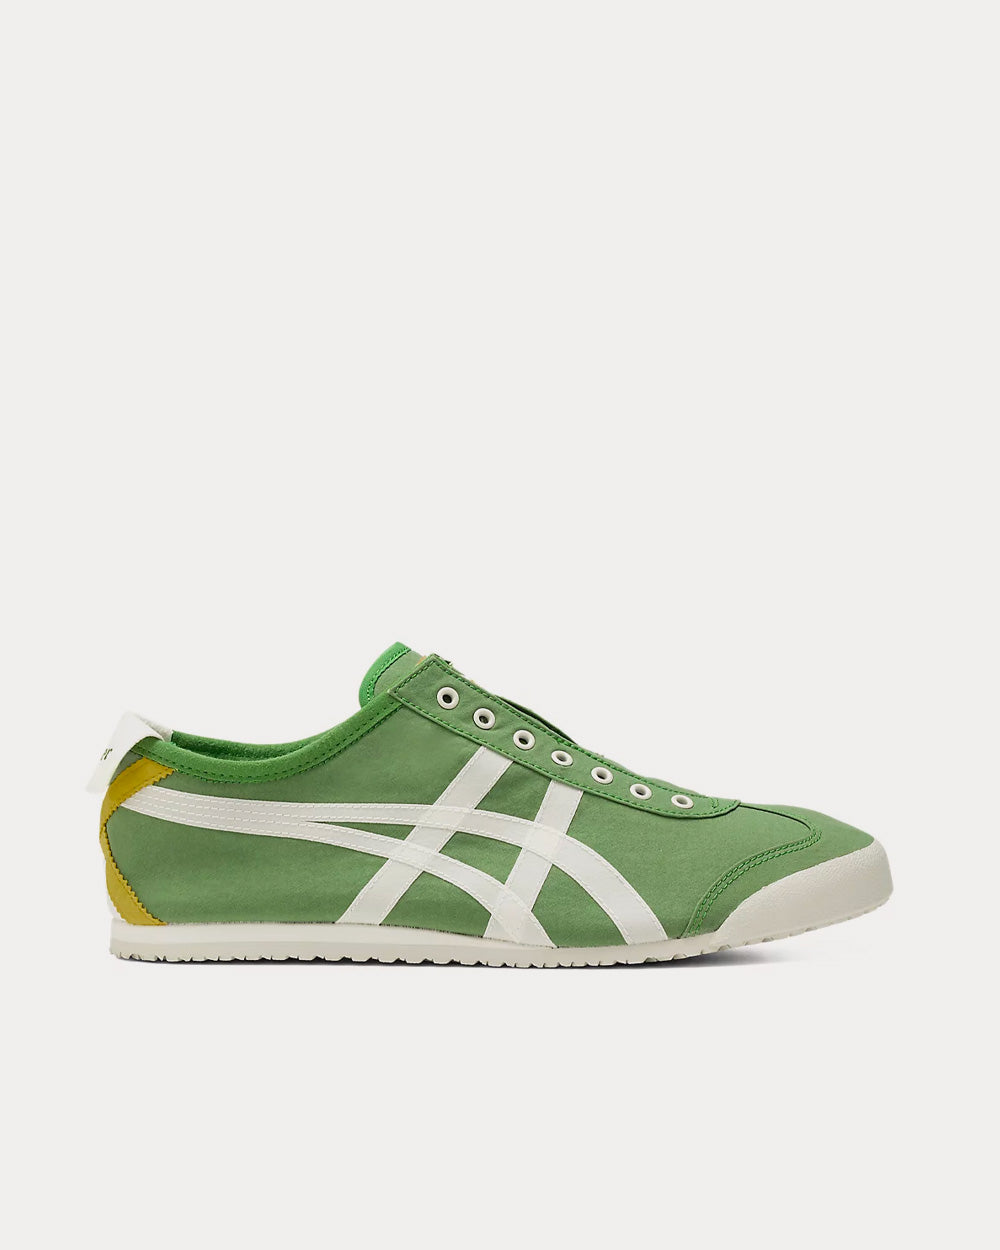 Onitsuka Tiger Mexico 66 Spinach Green / Cream Slip On Sneakers - Sneak ...